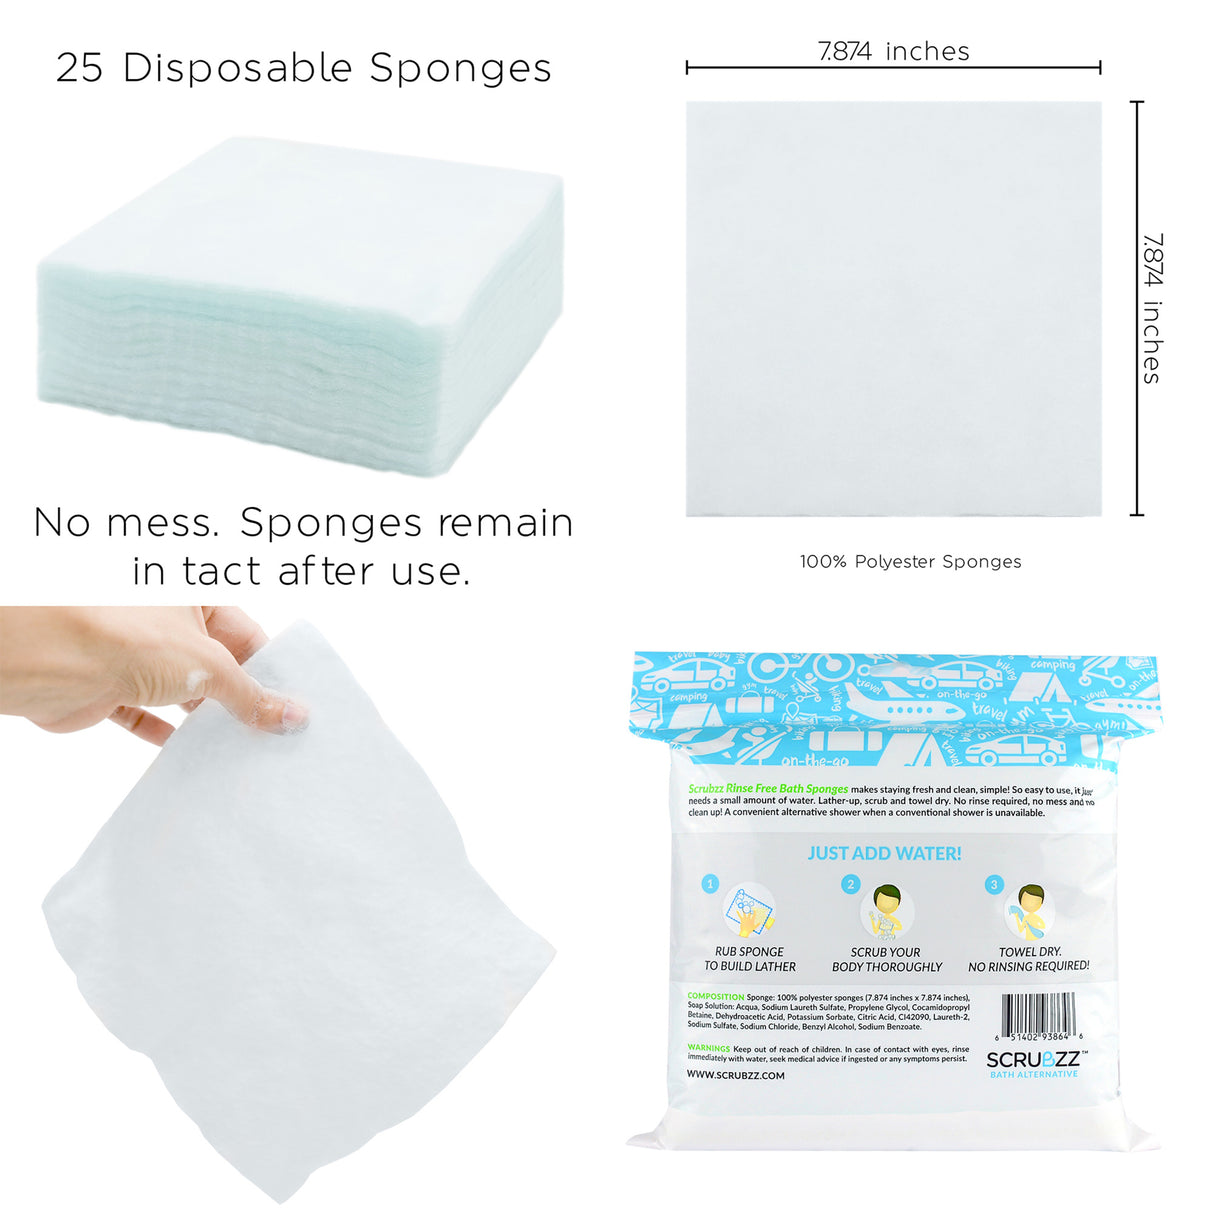 Scrubbz Instructions. 25 Disposable Sponges. No Mess Sponges remain in tact after use. 